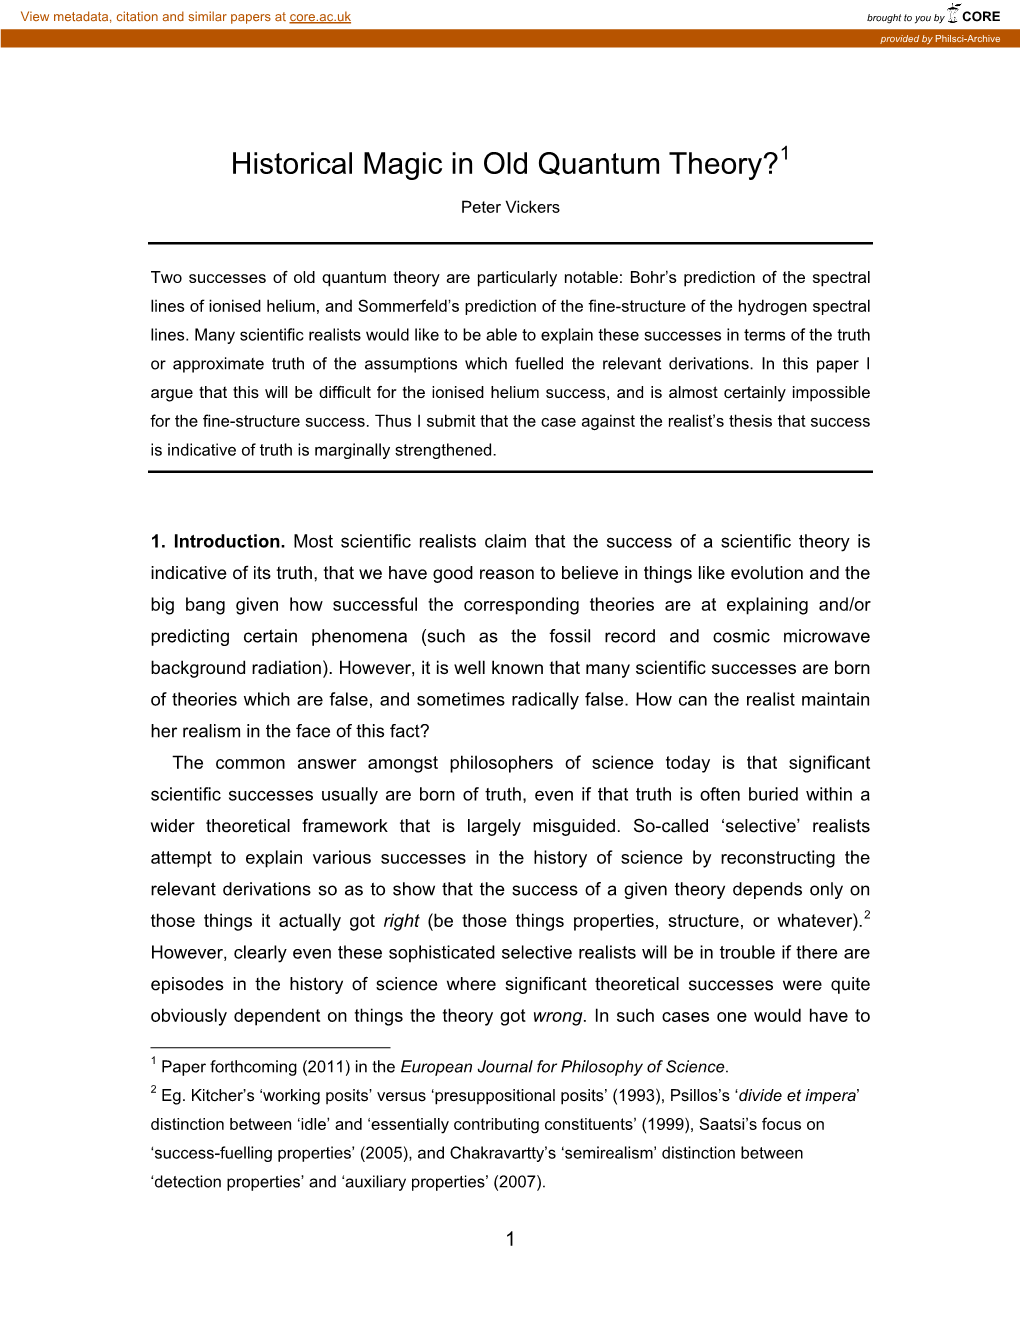 Historical Magic in Old Quantum Theory?1